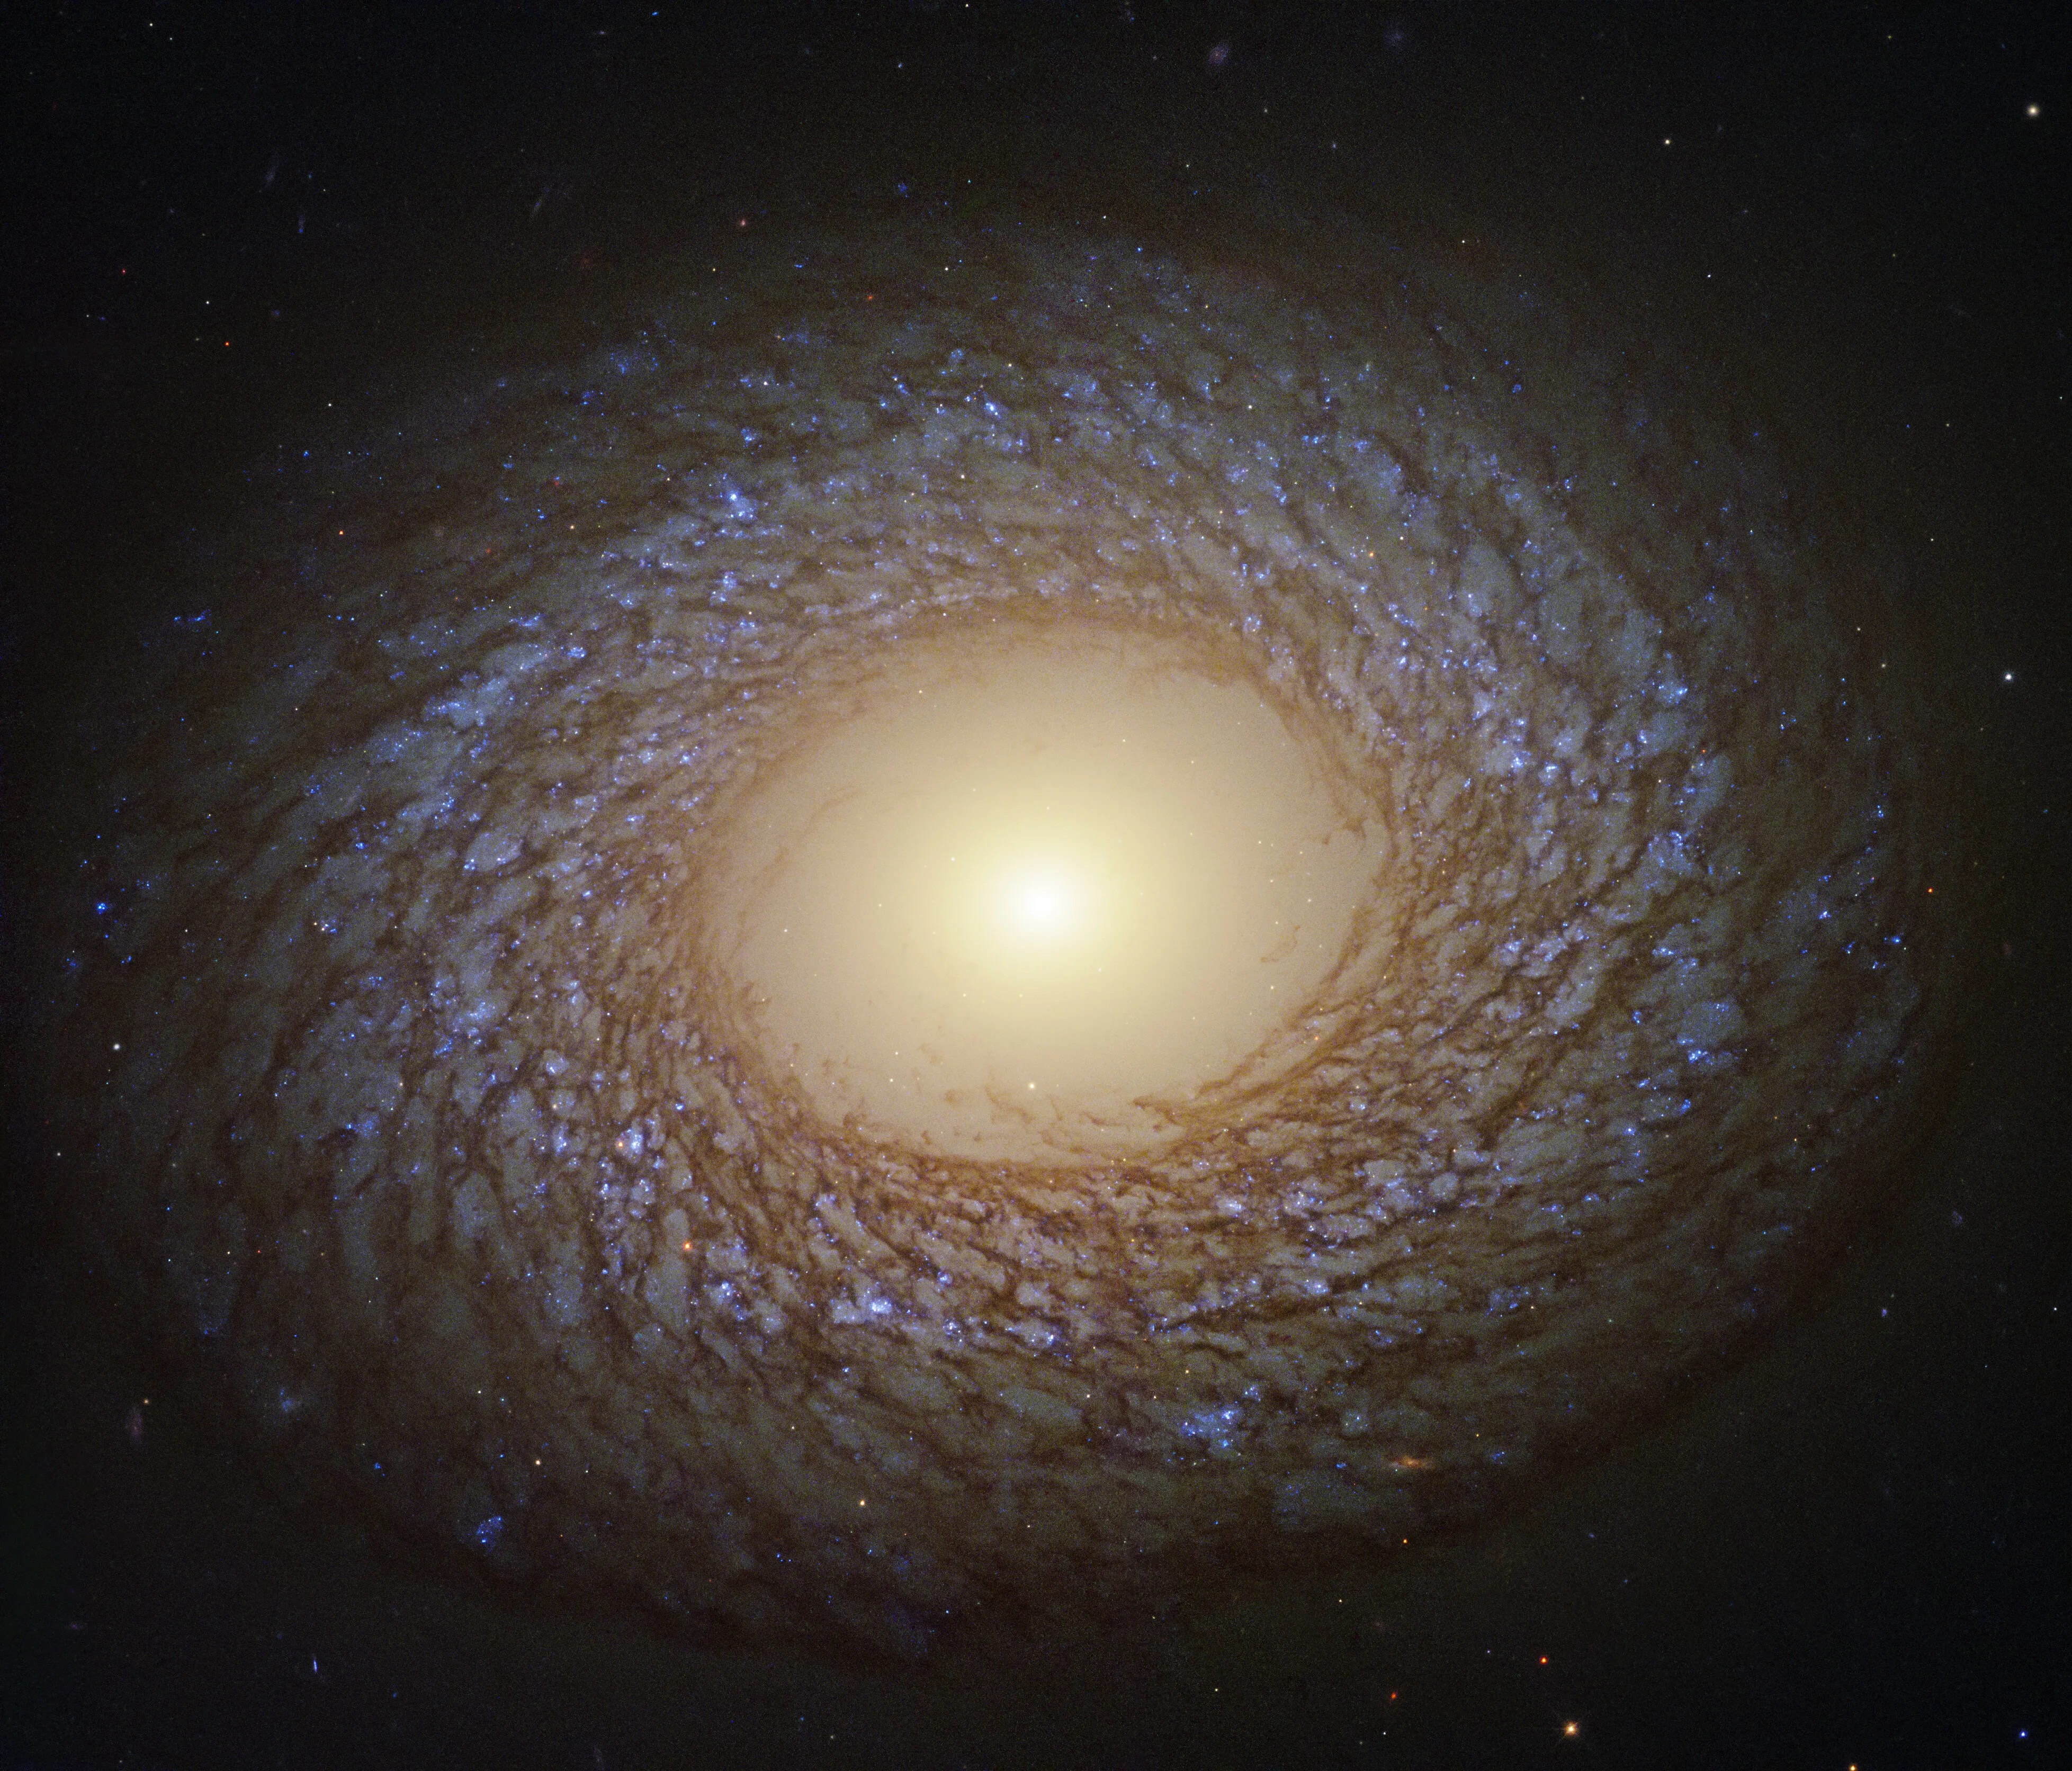 A galaxy with a large, yellow core shines against black space, surrounded by feathery, short spiral arms laced with dark brown dust and blue regions of star formation.